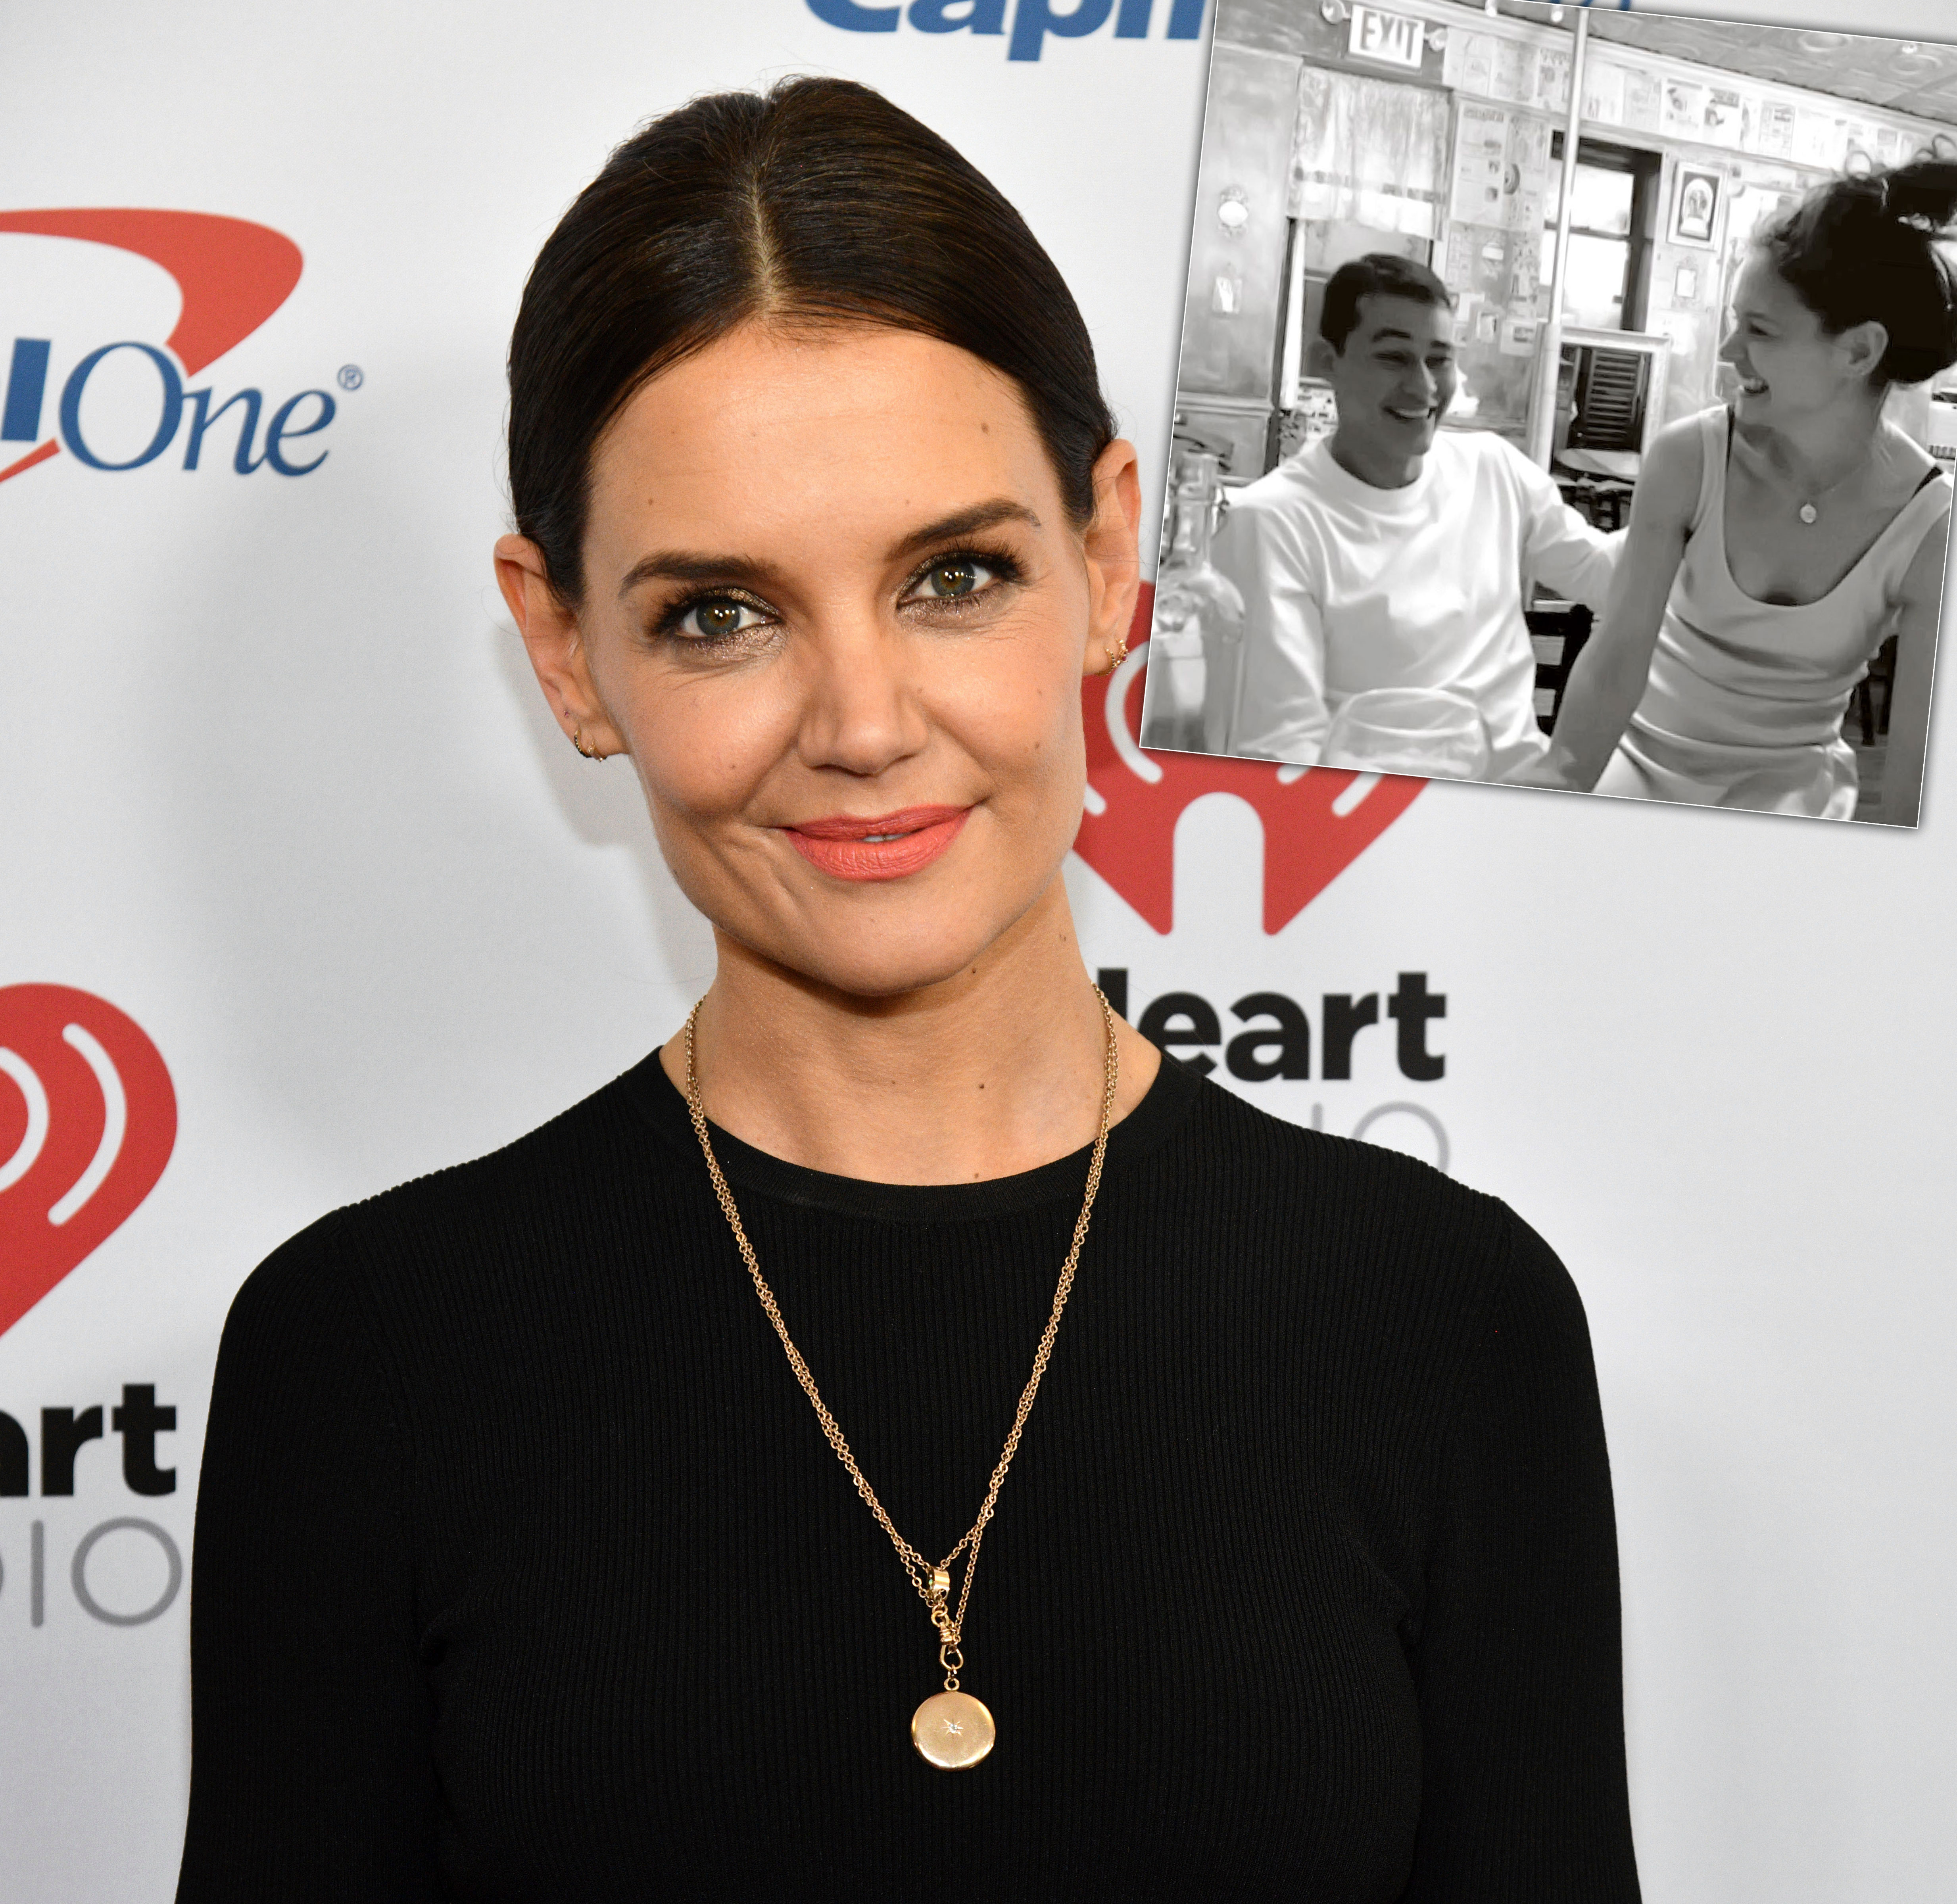 Katie Holmes' Affordable Necklace Is Back After Selling Out 4 Times